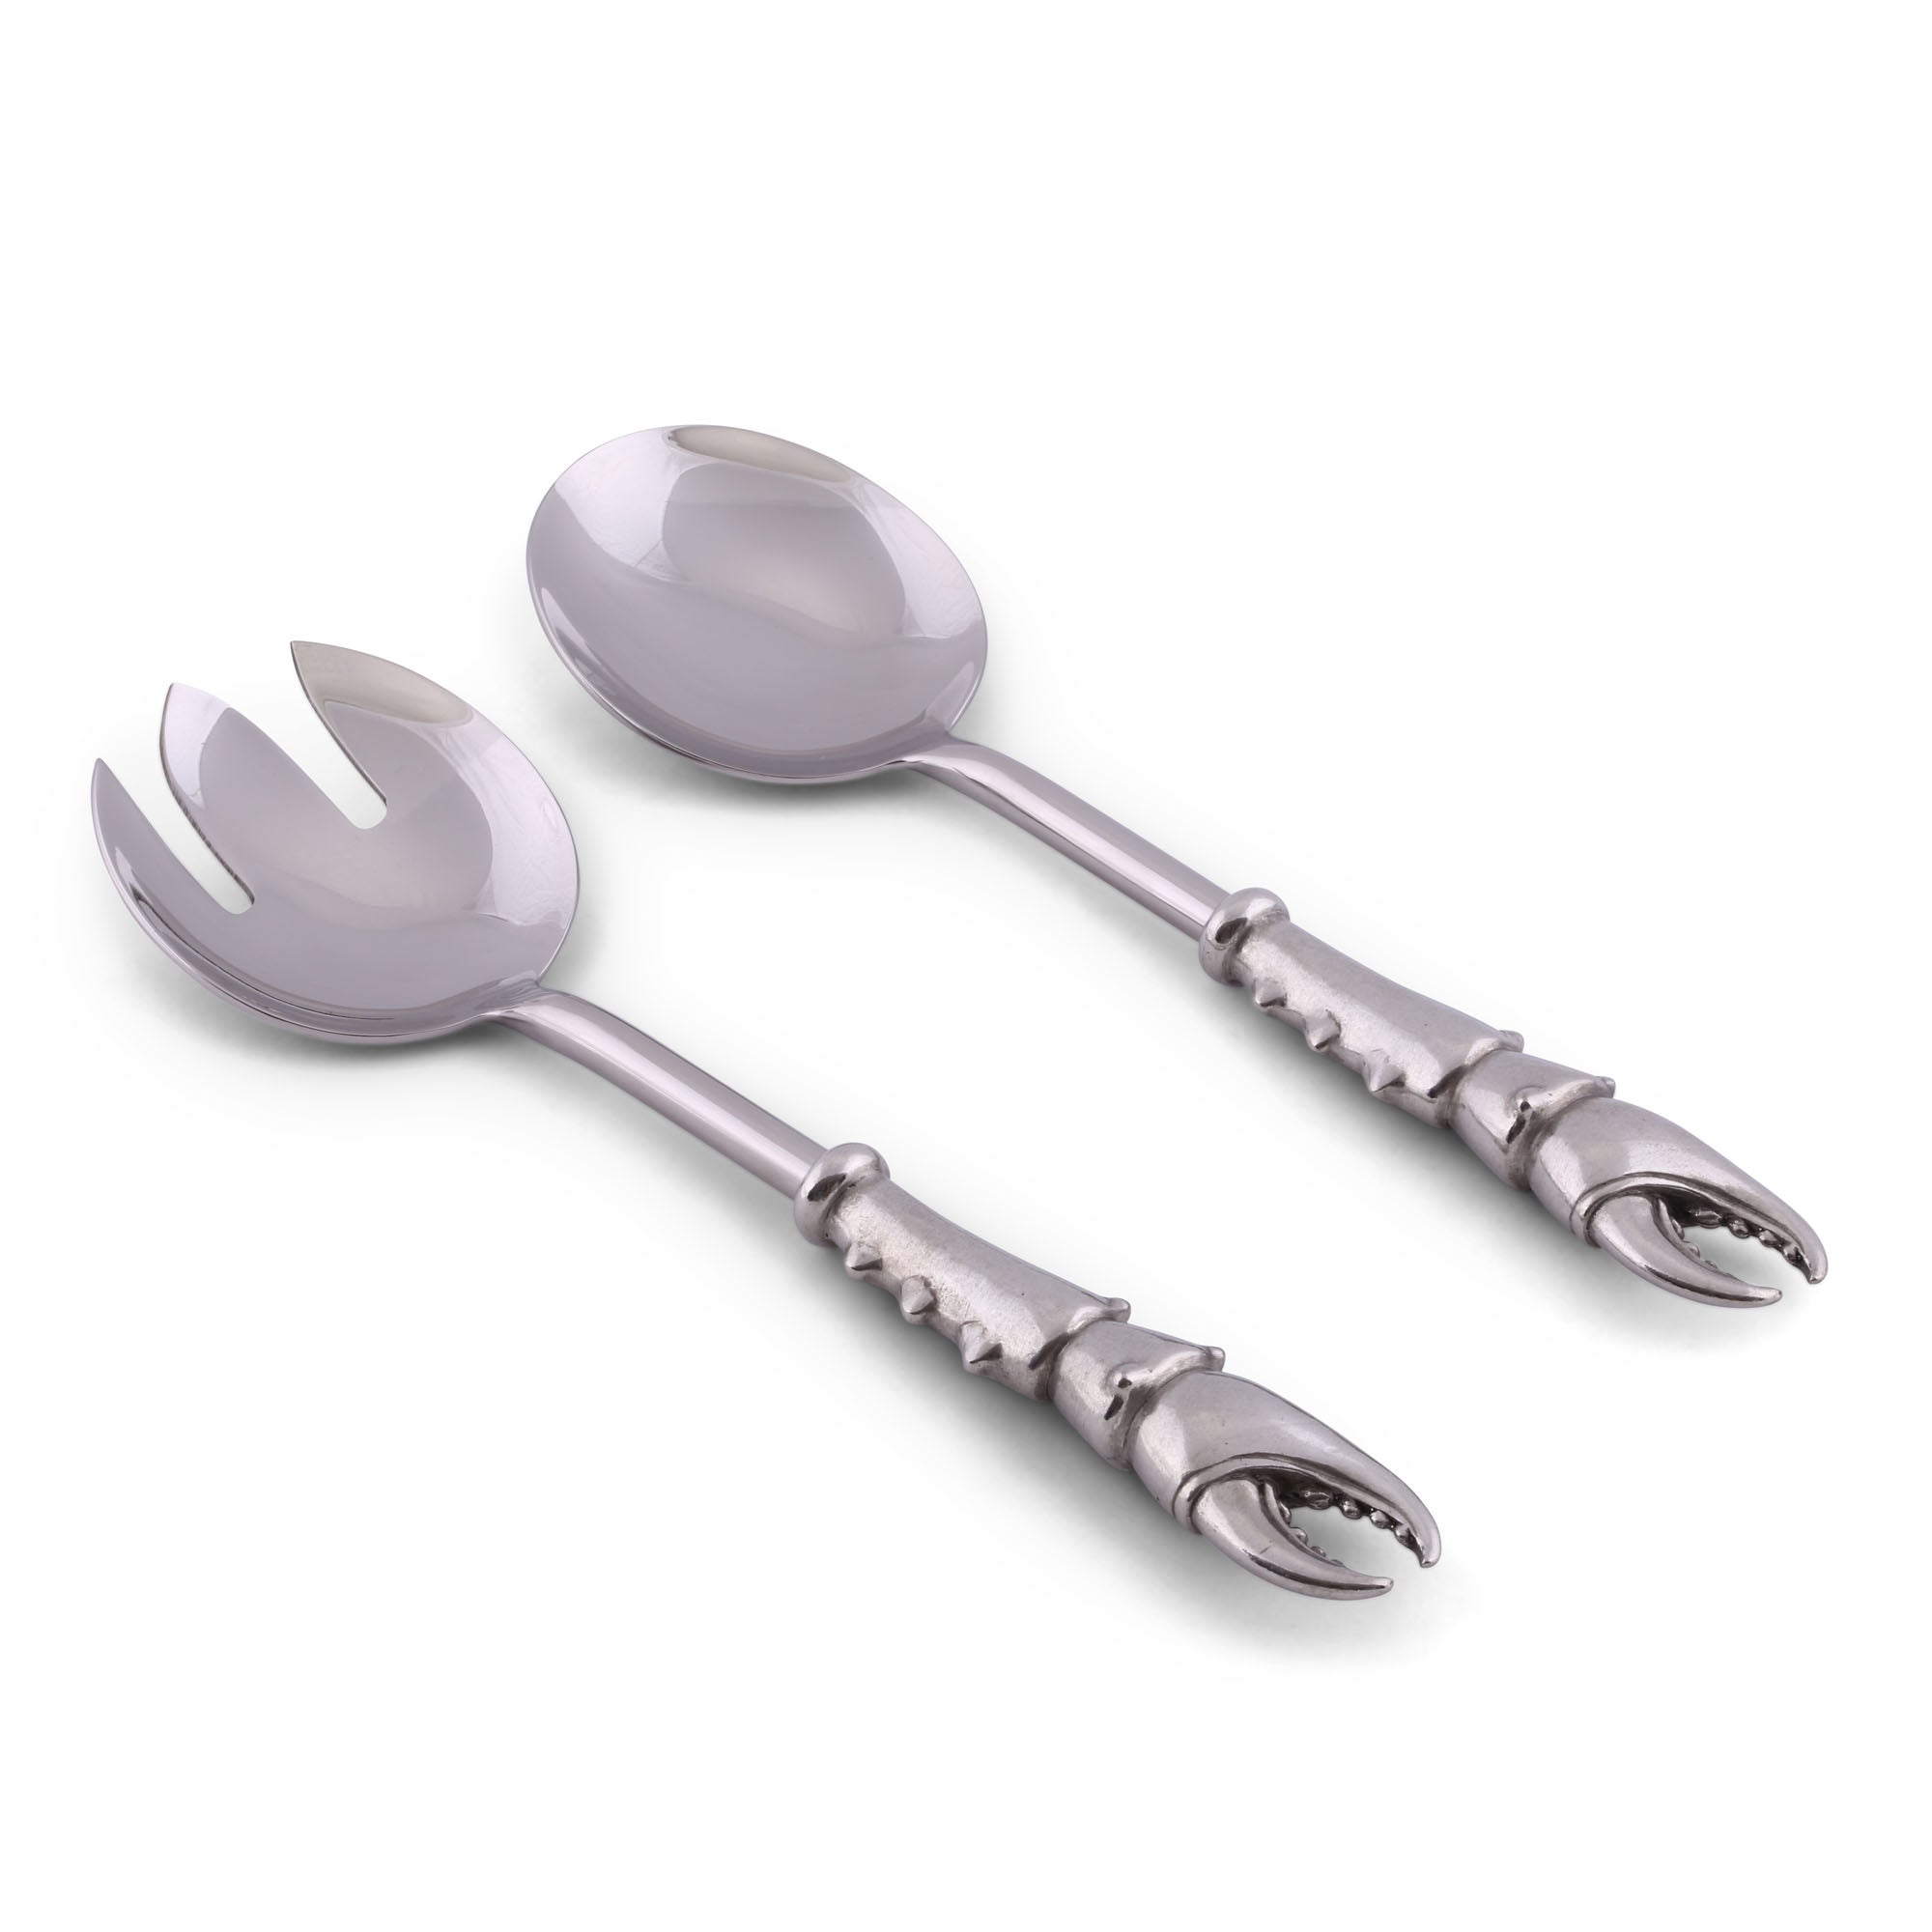 Pewter Nautical Baby Spoons